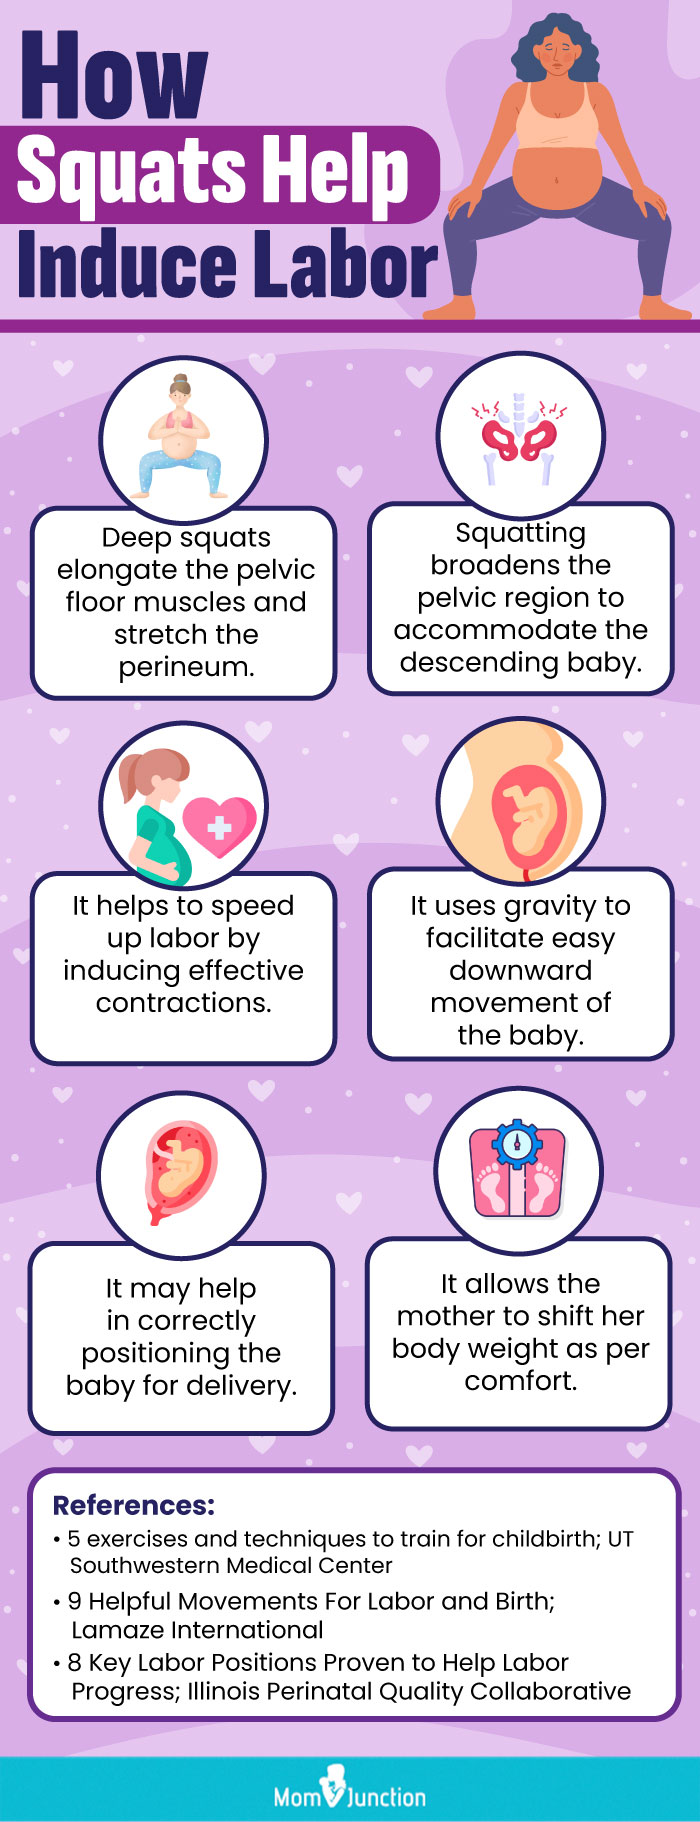 how squats help induce labor (infographic)